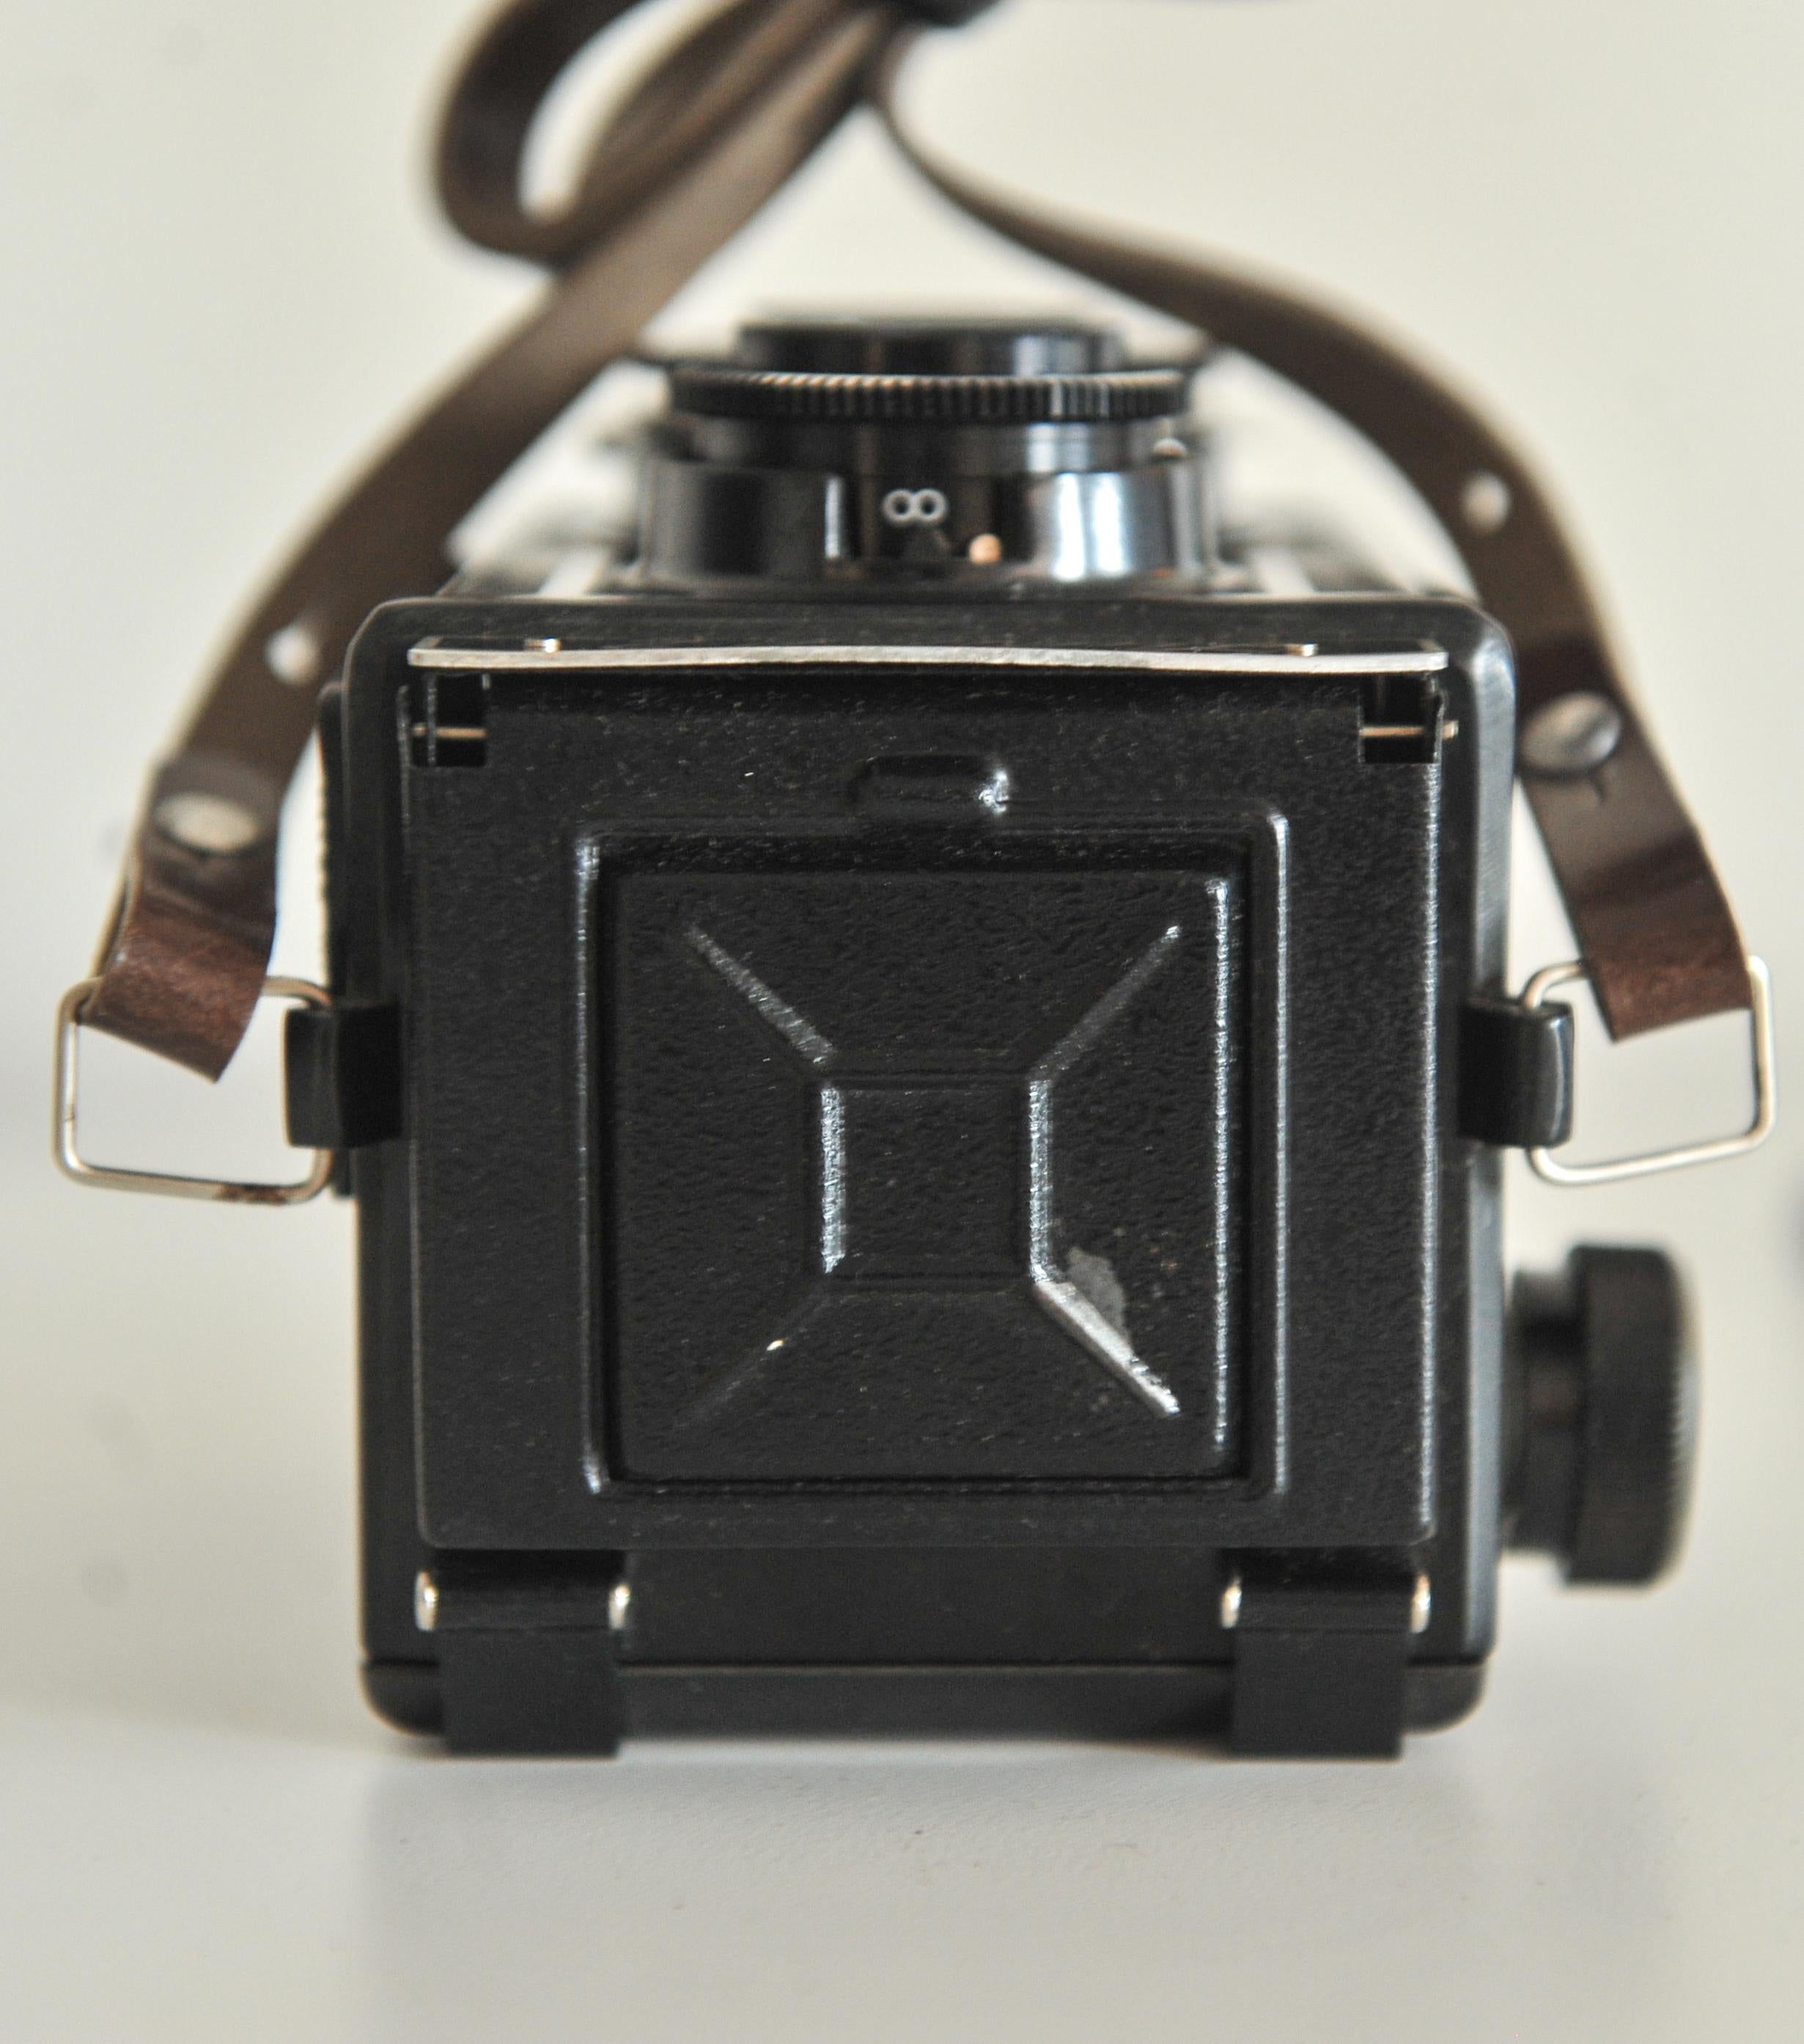 Metal Lubitel 2 Bakelite With LOMO T-22 75/4.5 Taking Lens Manufactured by OMO  For Sale